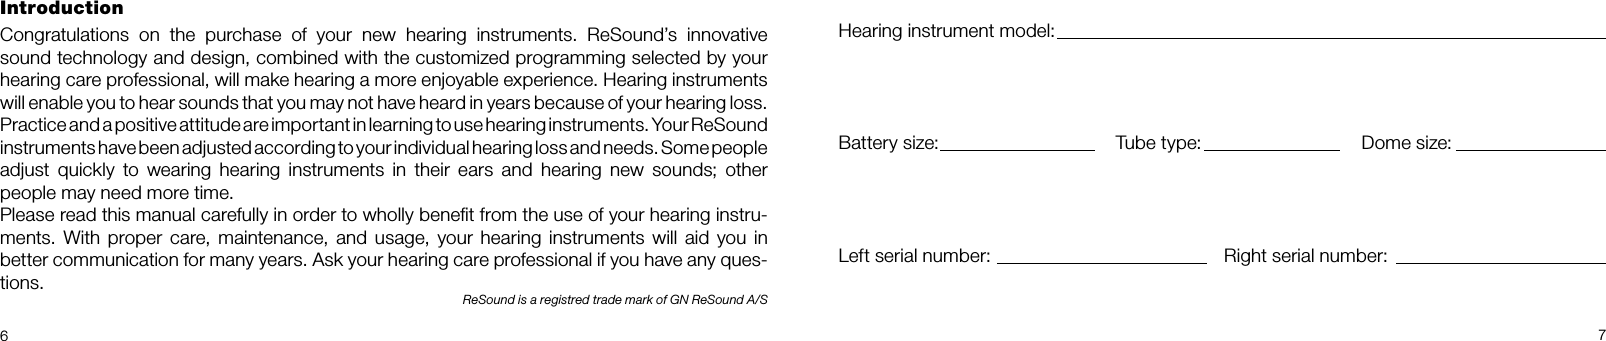 67Hearing instrument model: Battery size:               Tube type:                  Dome size: Left serial number:         Right serial number: IntroductionCongratulations  on  the  purchase  of  your  new  hearing  instruments.  ReSound’s  innovative  sound technology and design, combined with the customized programming selected by your hearing care professional, will make hearing a more enjoyable experience. Hearing instruments will enable you to hear sounds that you may not have heard in years because of your hearing loss. Practice and a positive attitude are important in learning to use hearing instruments. Your ReSound instruments have been adjusted according to your individual hearing loss and needs. Some people  adjust  quickly  to  wearing  hearing  instruments  in  their  ears  and  hearing  new  sounds; other  people may need more time.Please read this manual carefully in order to wholly beneﬁt from the use of your hearing instru-ments. With proper  care, maintenance, and usage,  your hearing instruments  will  aid  you in better communication for many years. Ask your hearing care professional if you have any ques-tions.ReSound is a registred trade mark of GN ReSound A/S